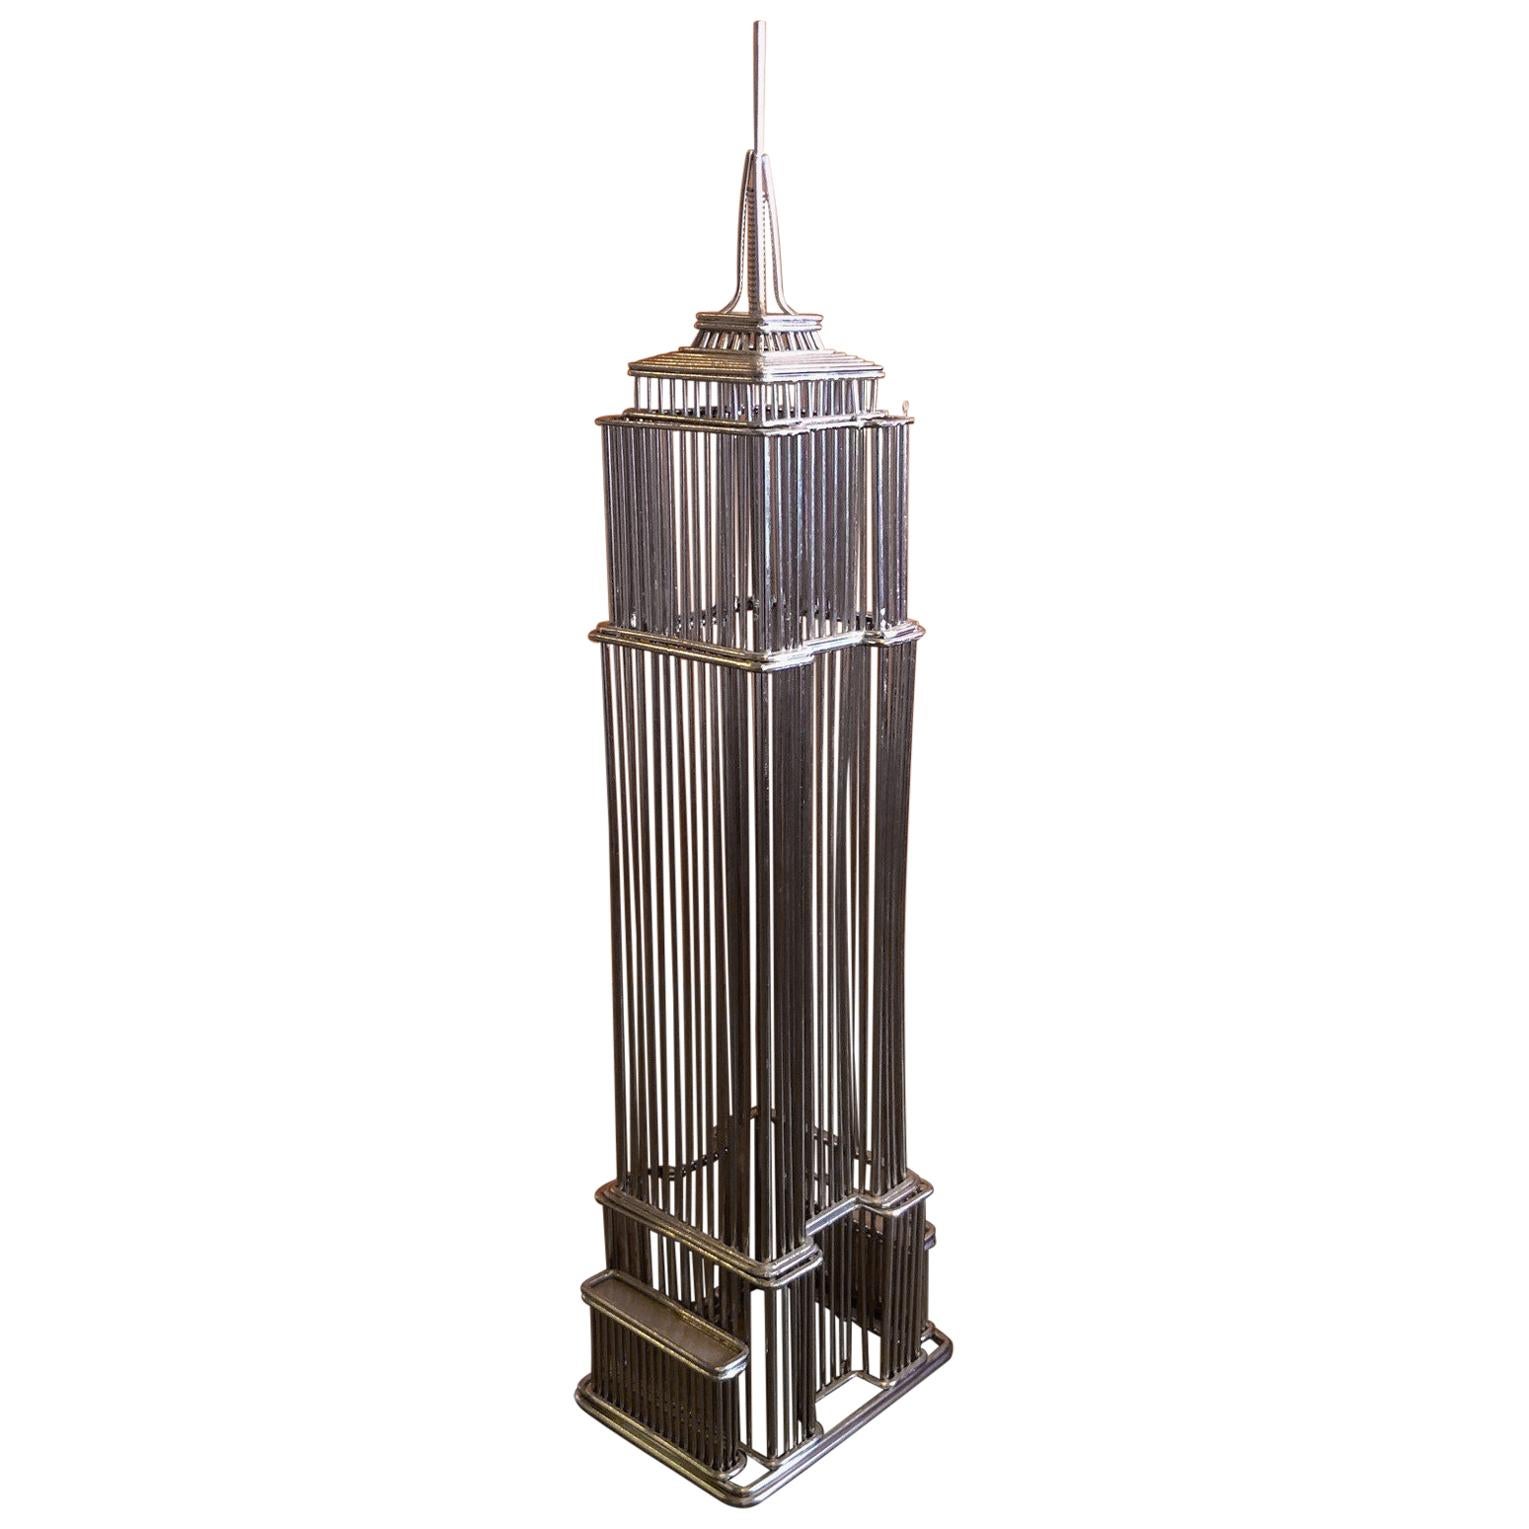 Empire State Building Wire Sculpture Model in Chrome